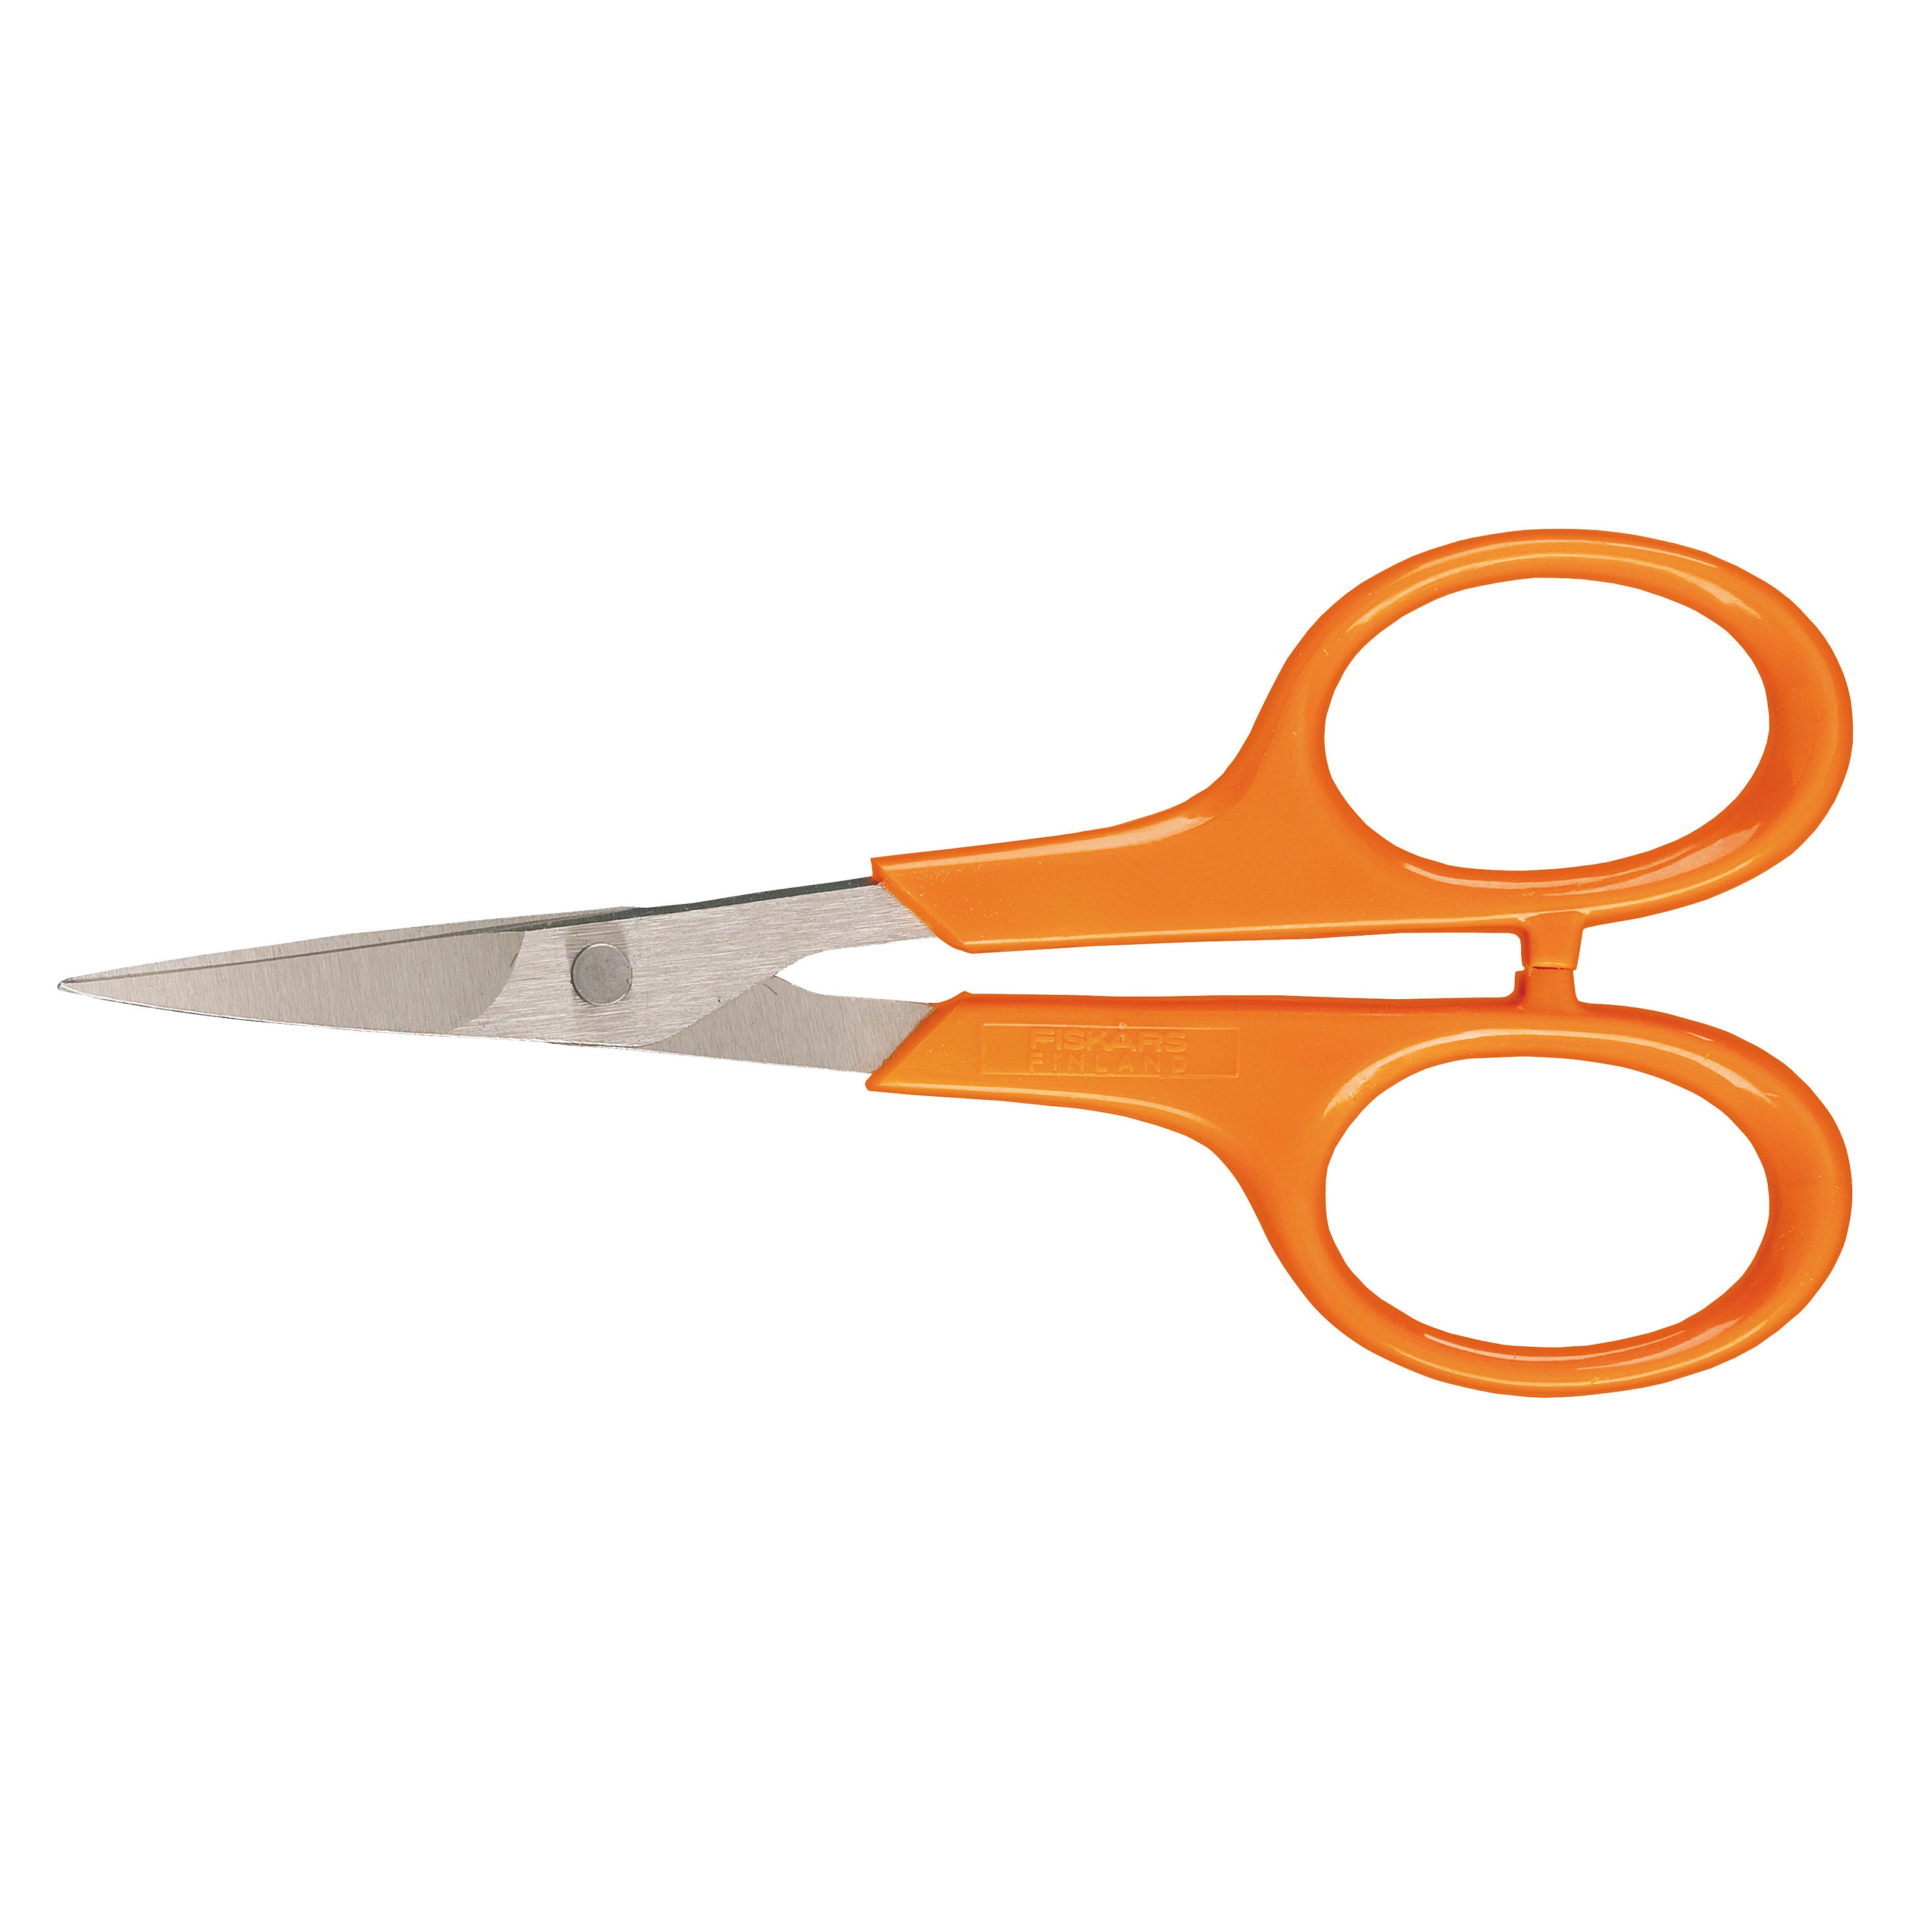 Fiskers finally made a second pair of left handed scissors : r/lefthanded